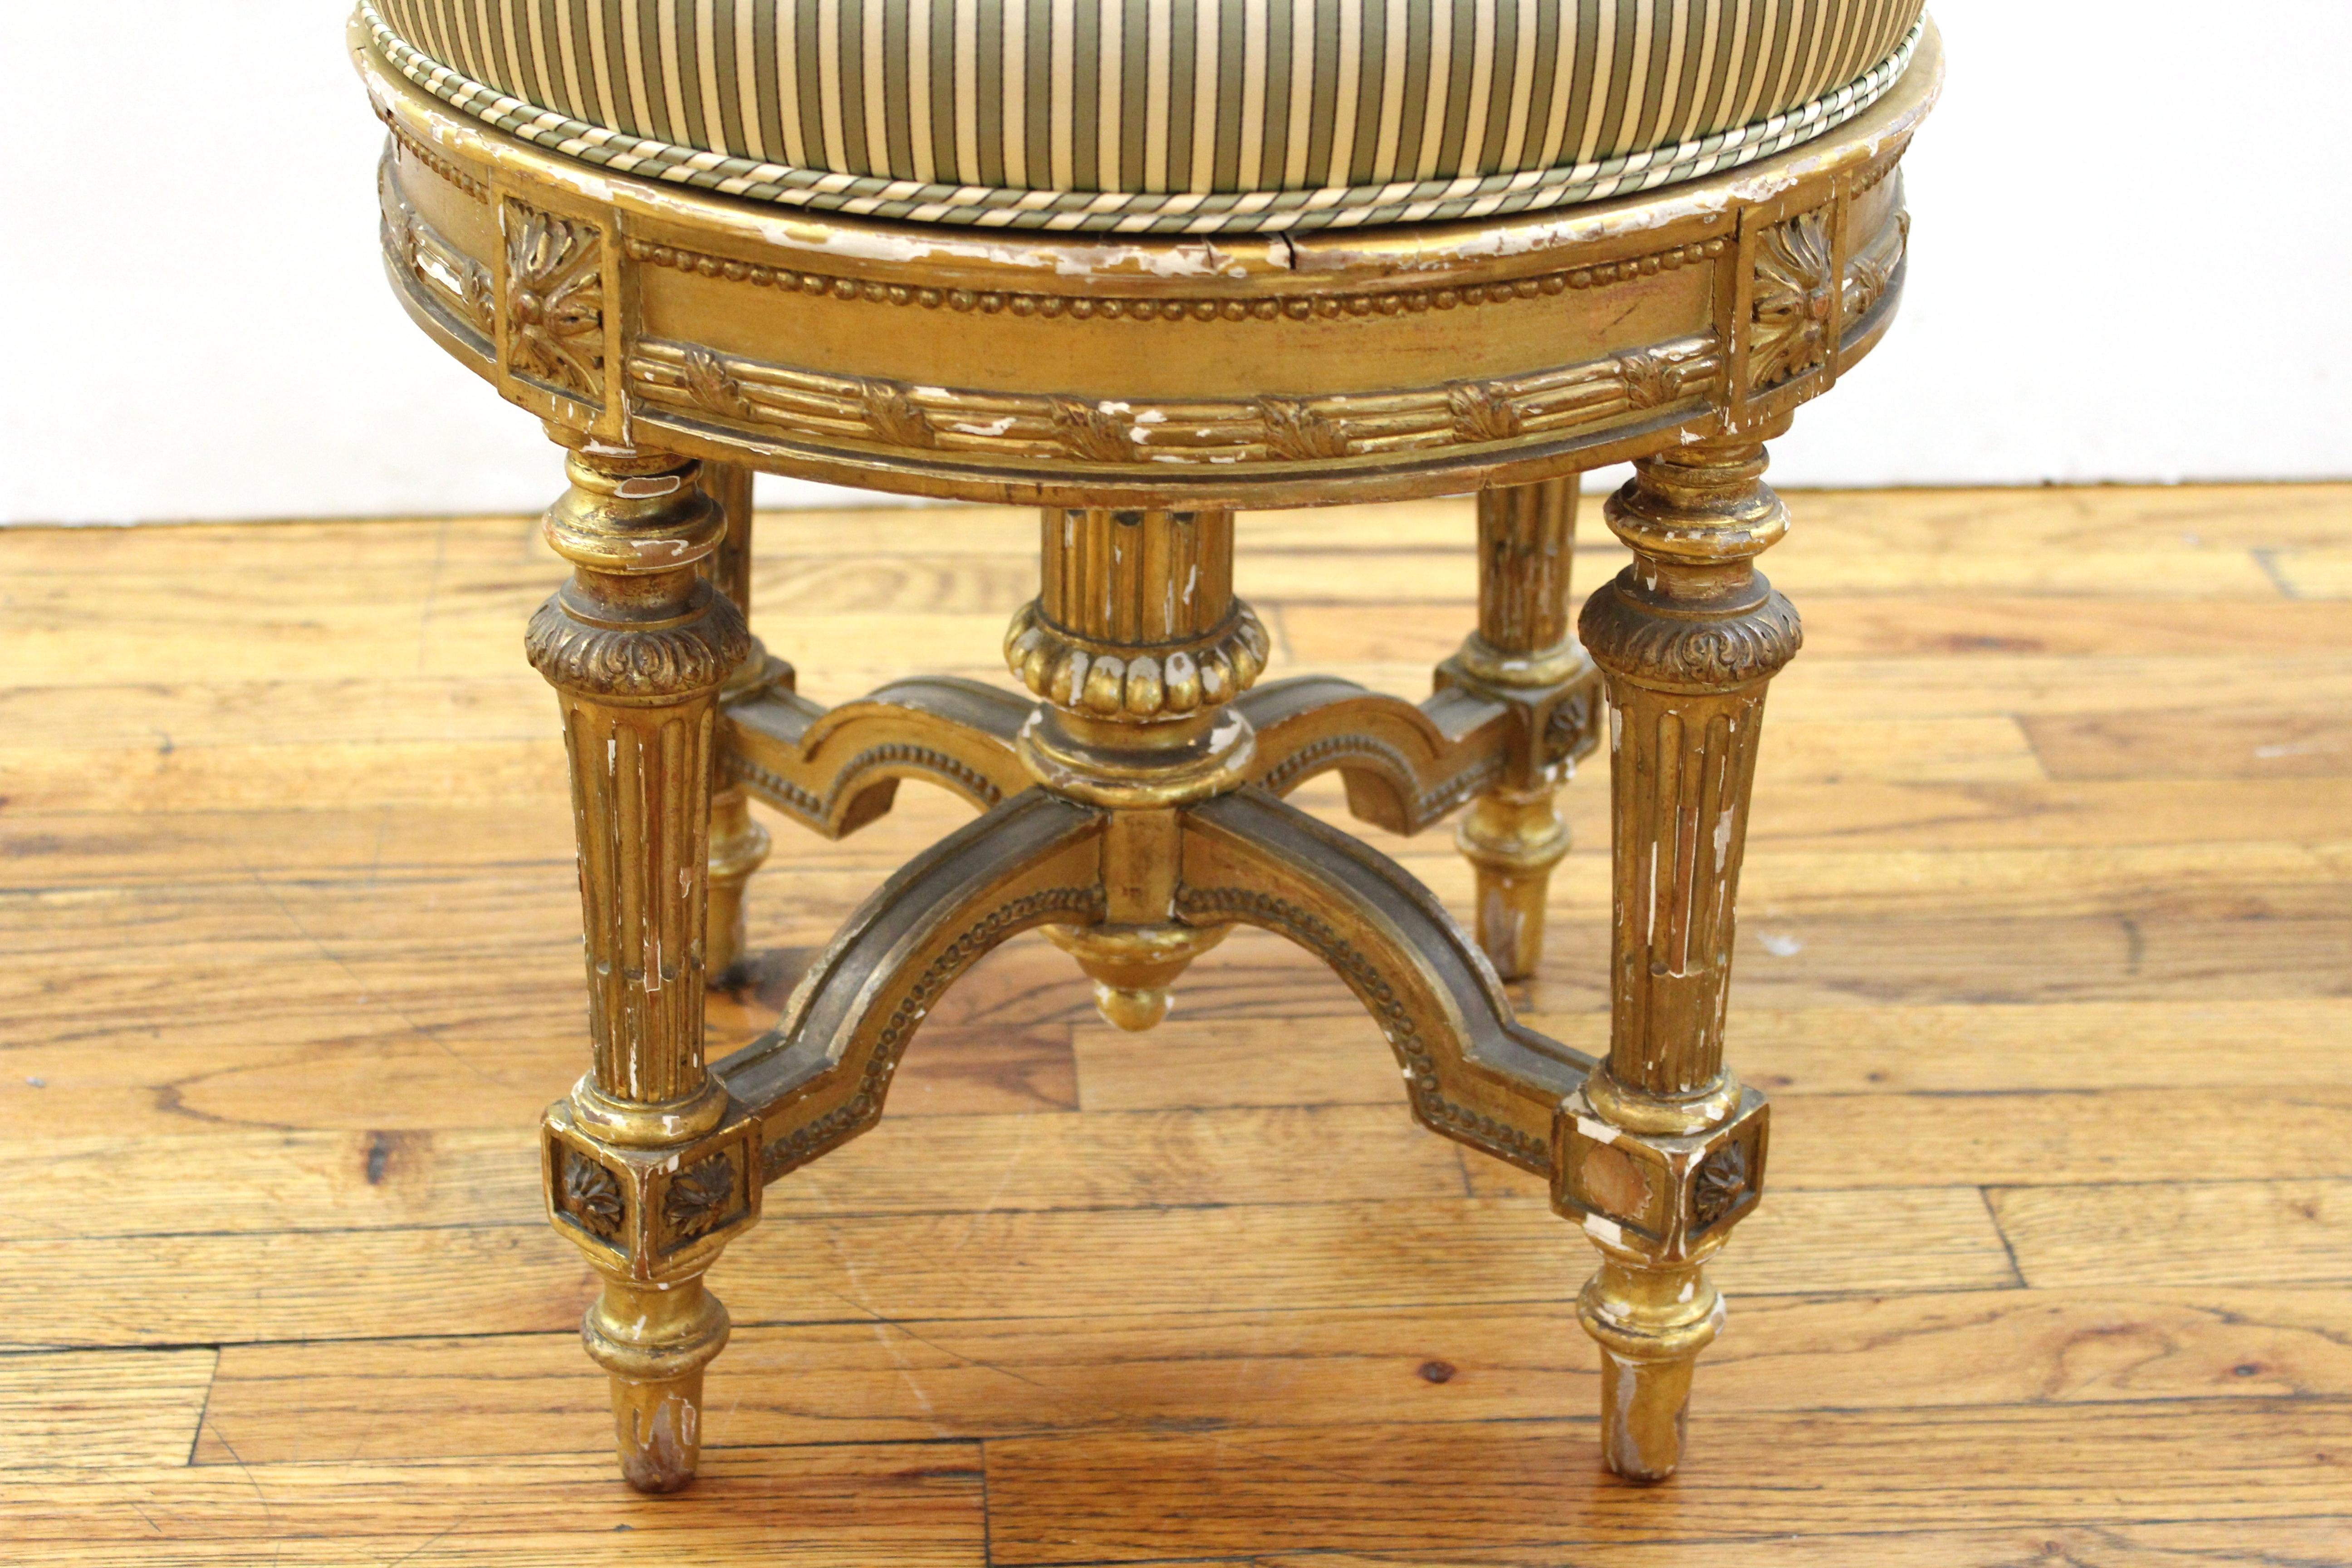 French Marie-Antoinette Style Giltwood Boudoir Chair